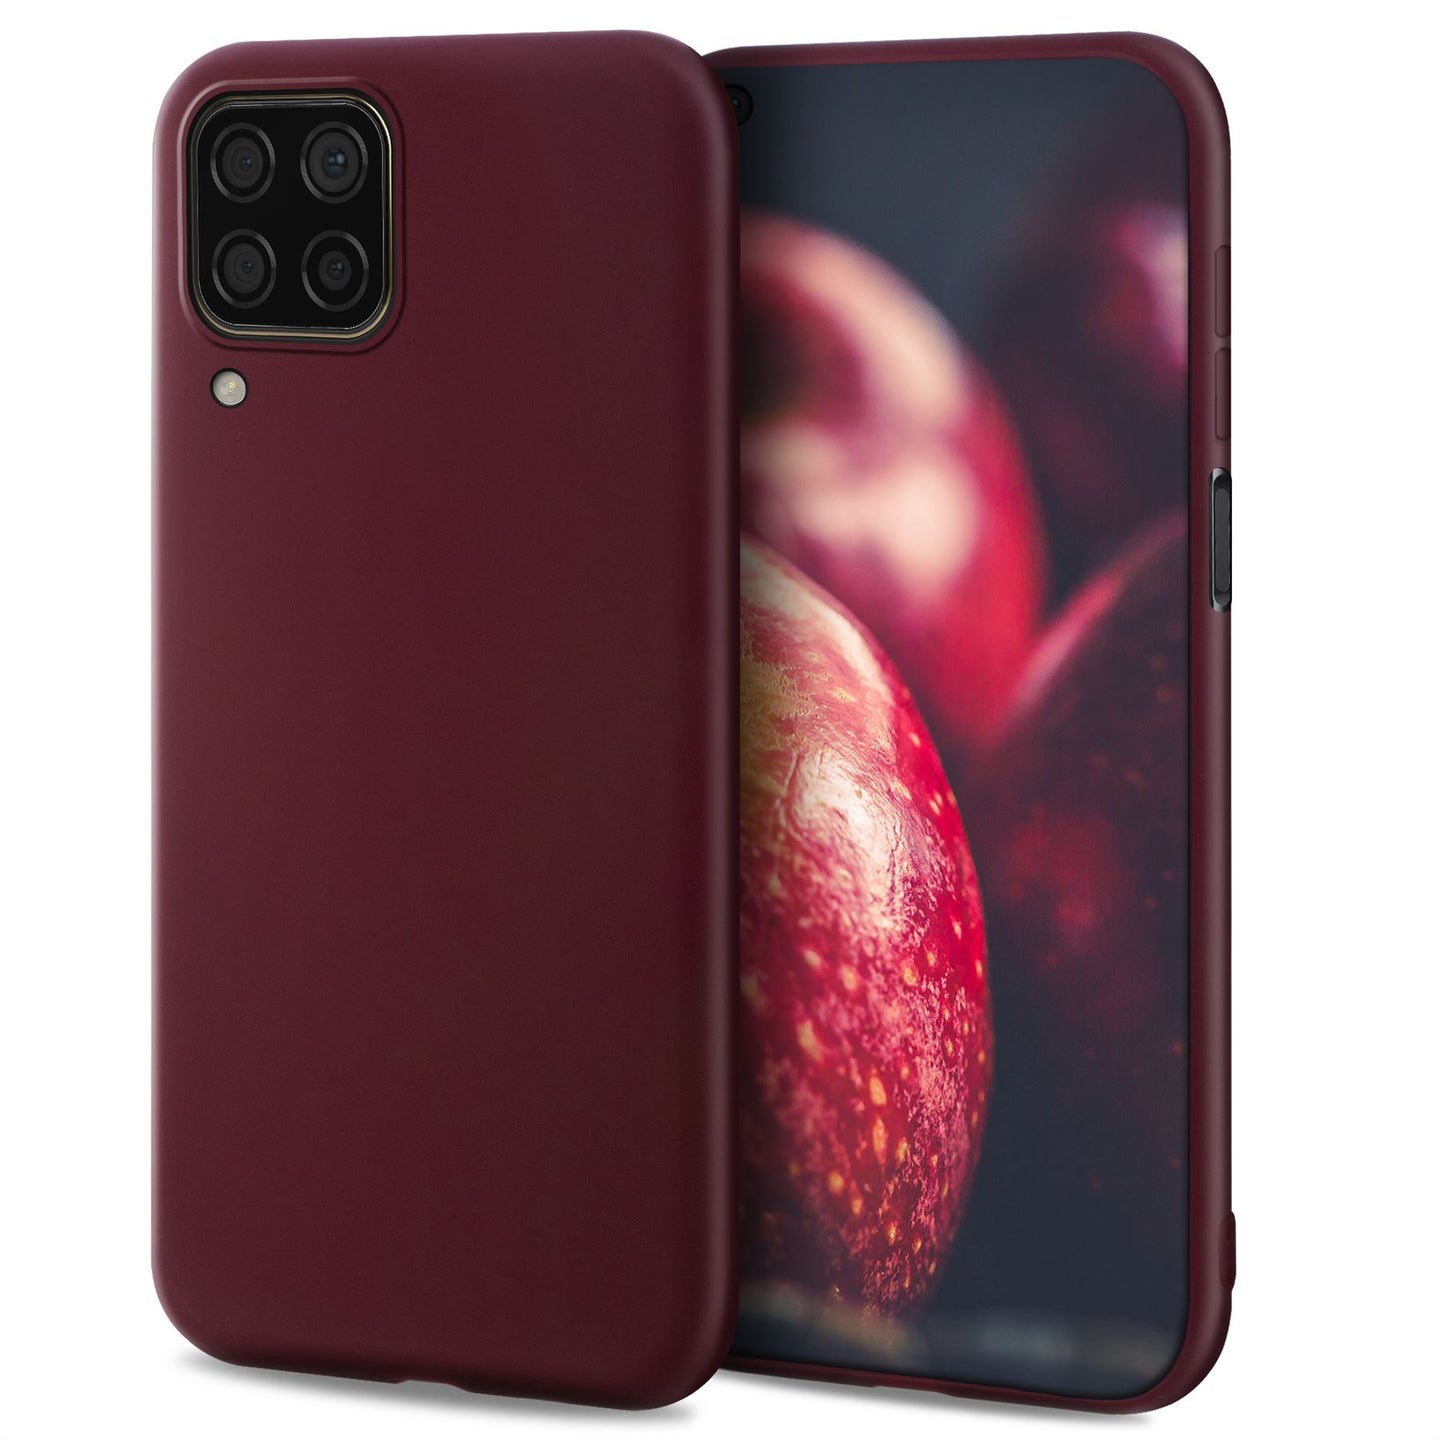 Moozy Minimalist Series Silicone Case for Huawei P40 Lite, Wine Red - Matte Finish Slim Soft TPU Cover